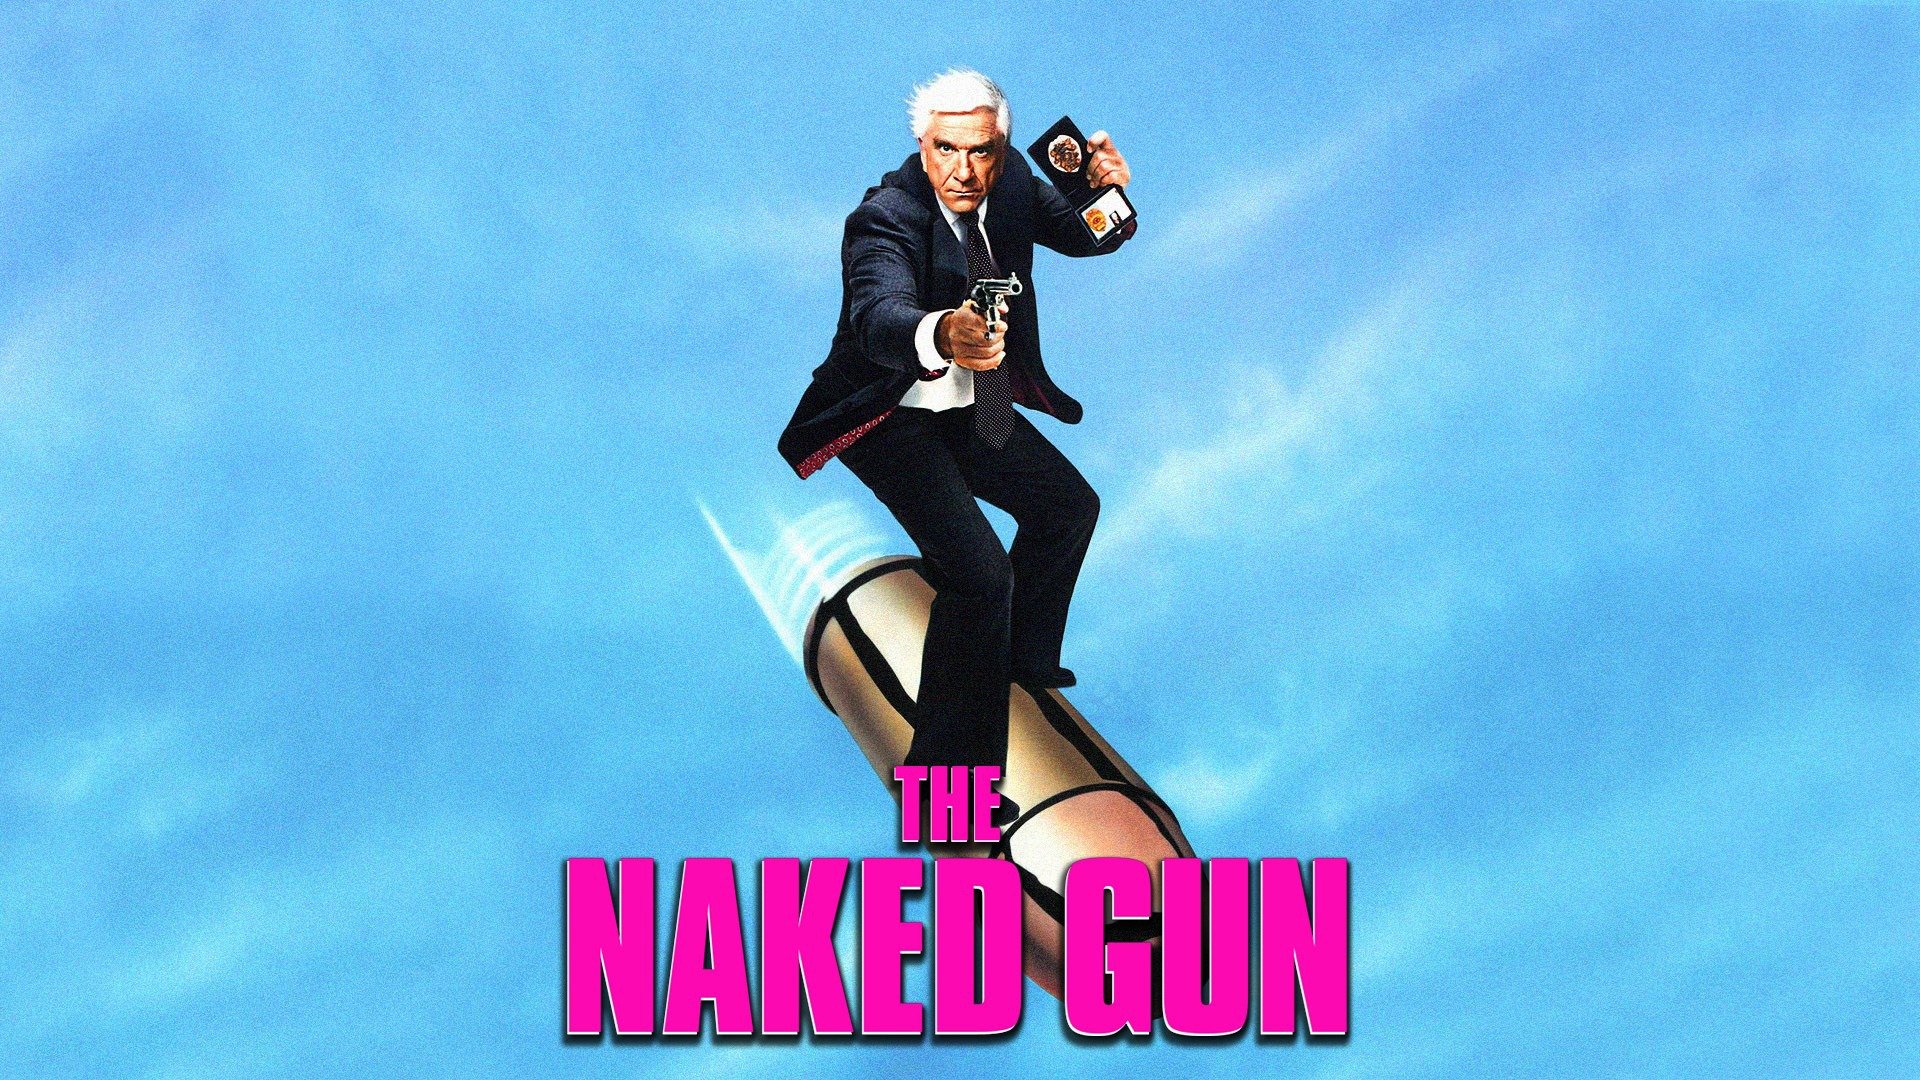 The Naked Gun Trailer 1 Trailers Videos Rotten Tomatoes